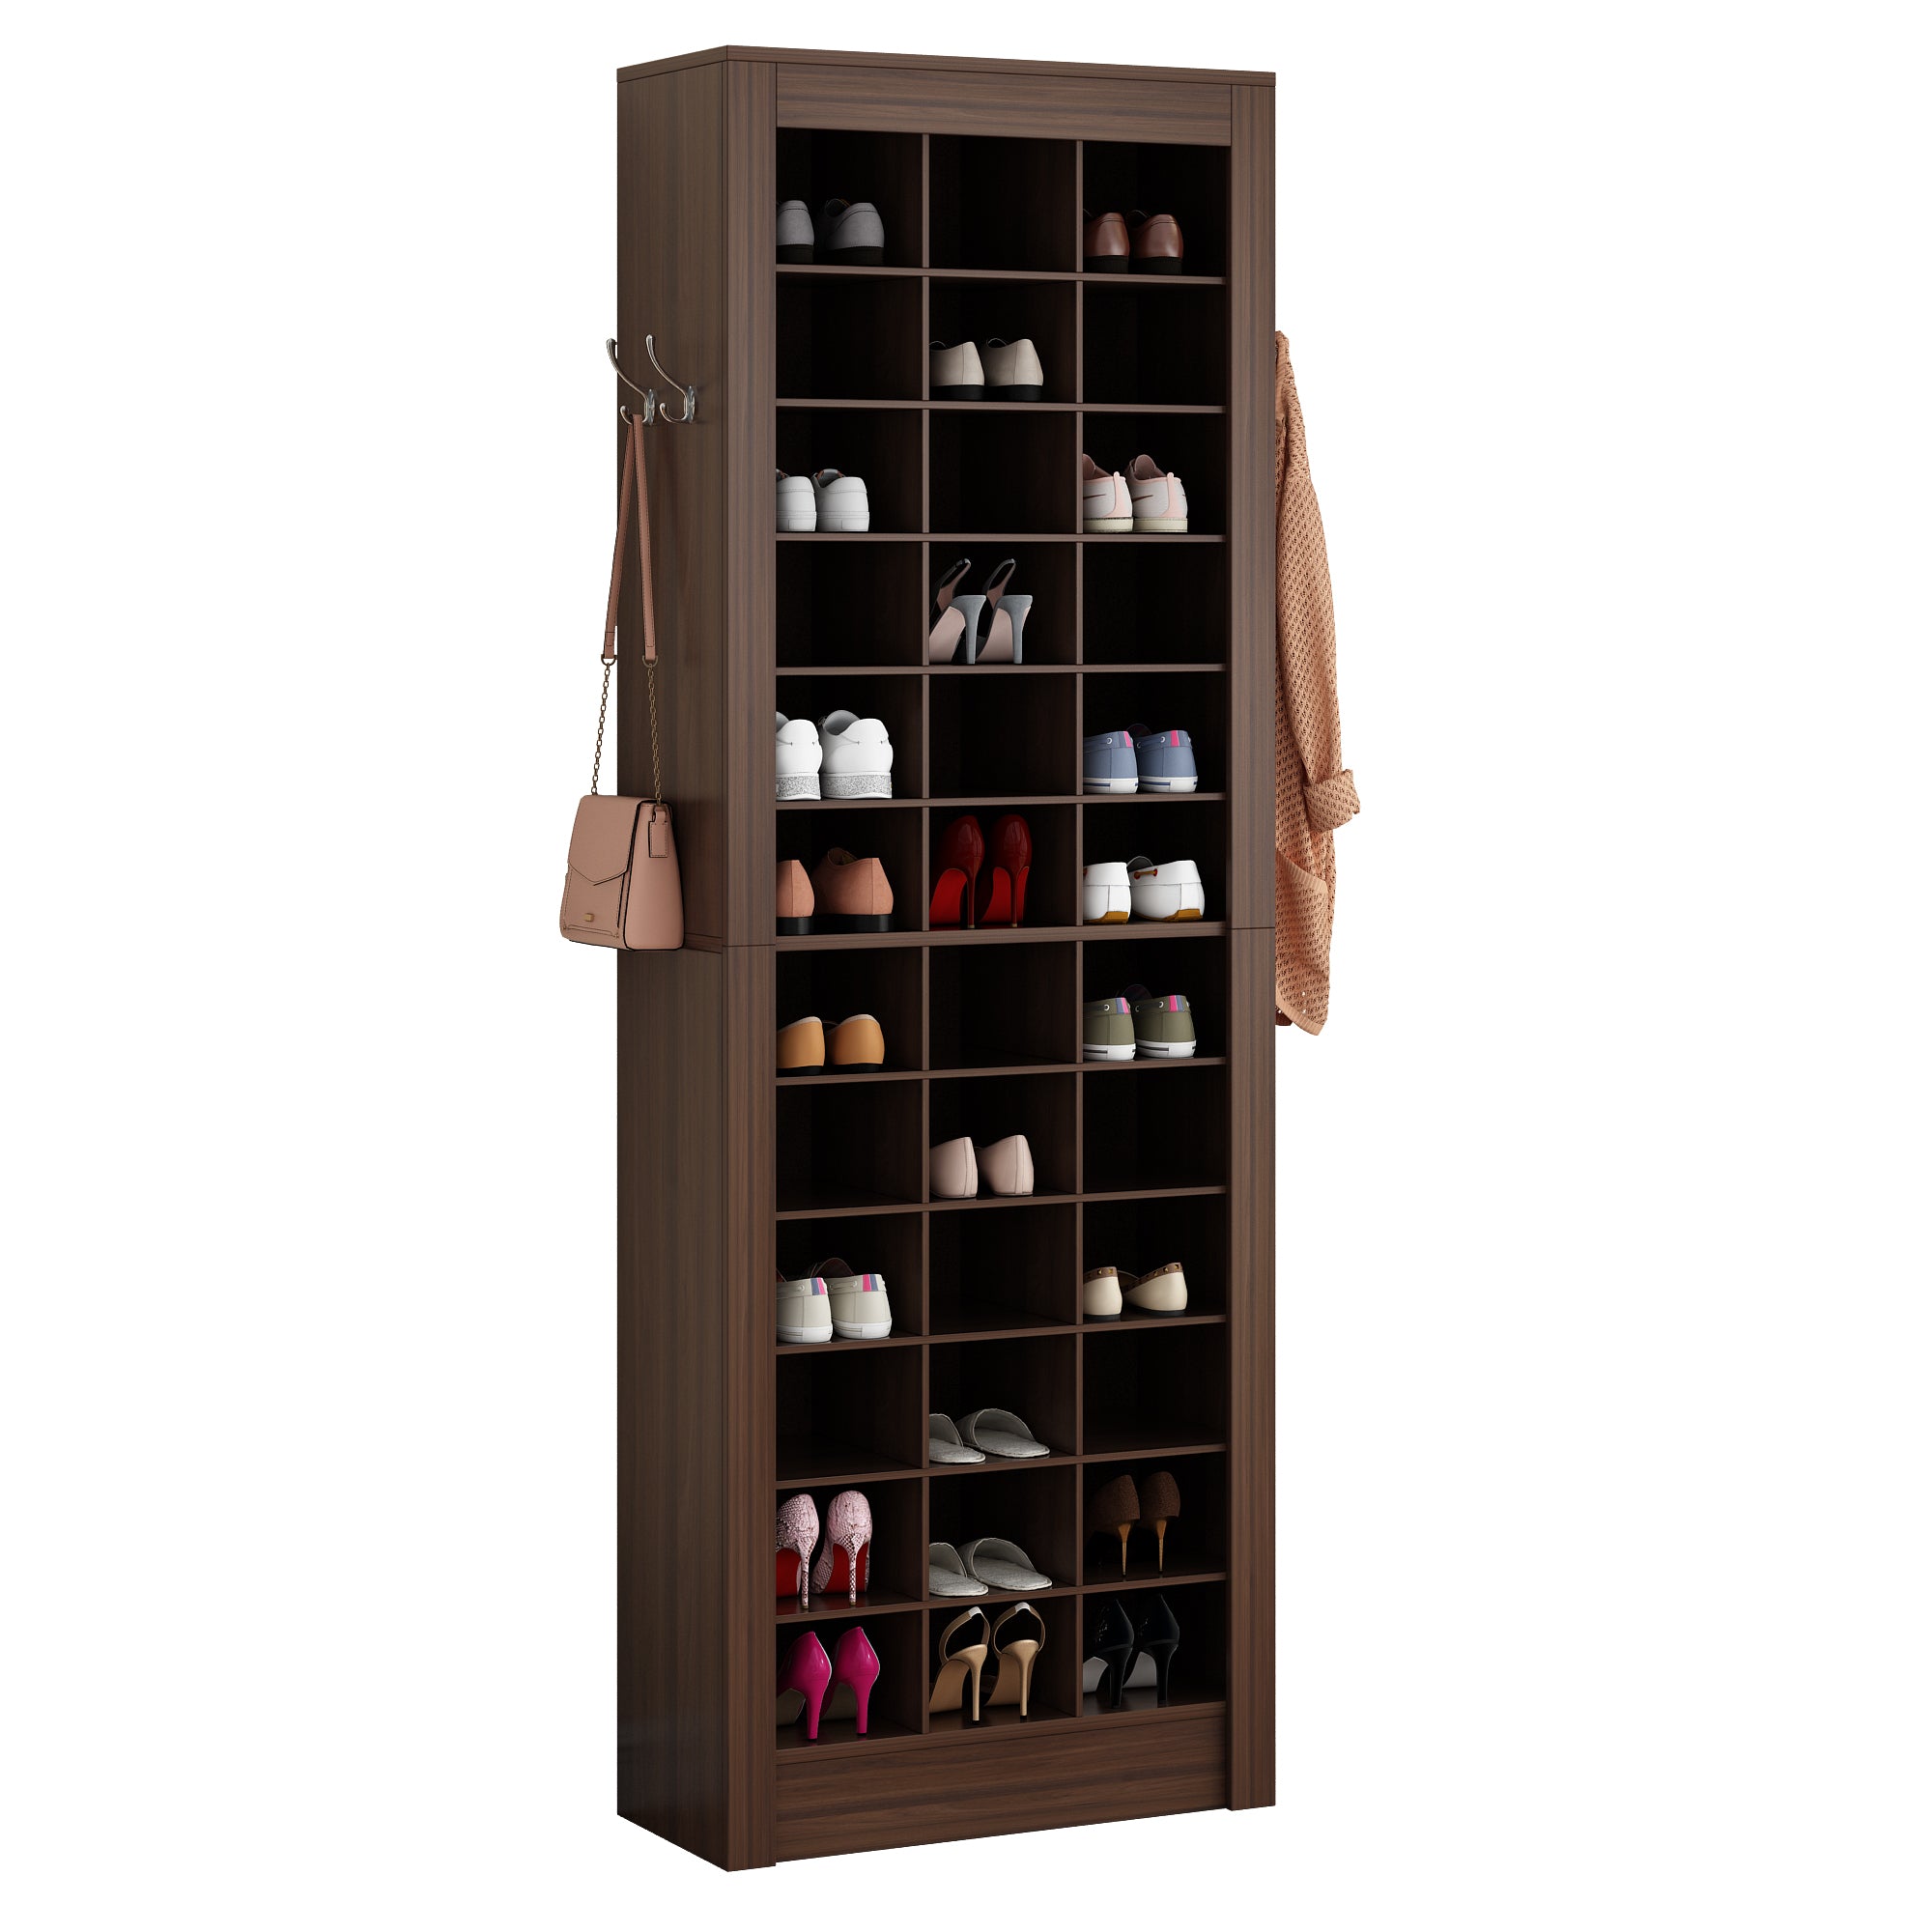 12-Layer 36-Compartment Shoe Rack with Particle Board and Melamine Adhesive - 72x32x203cm